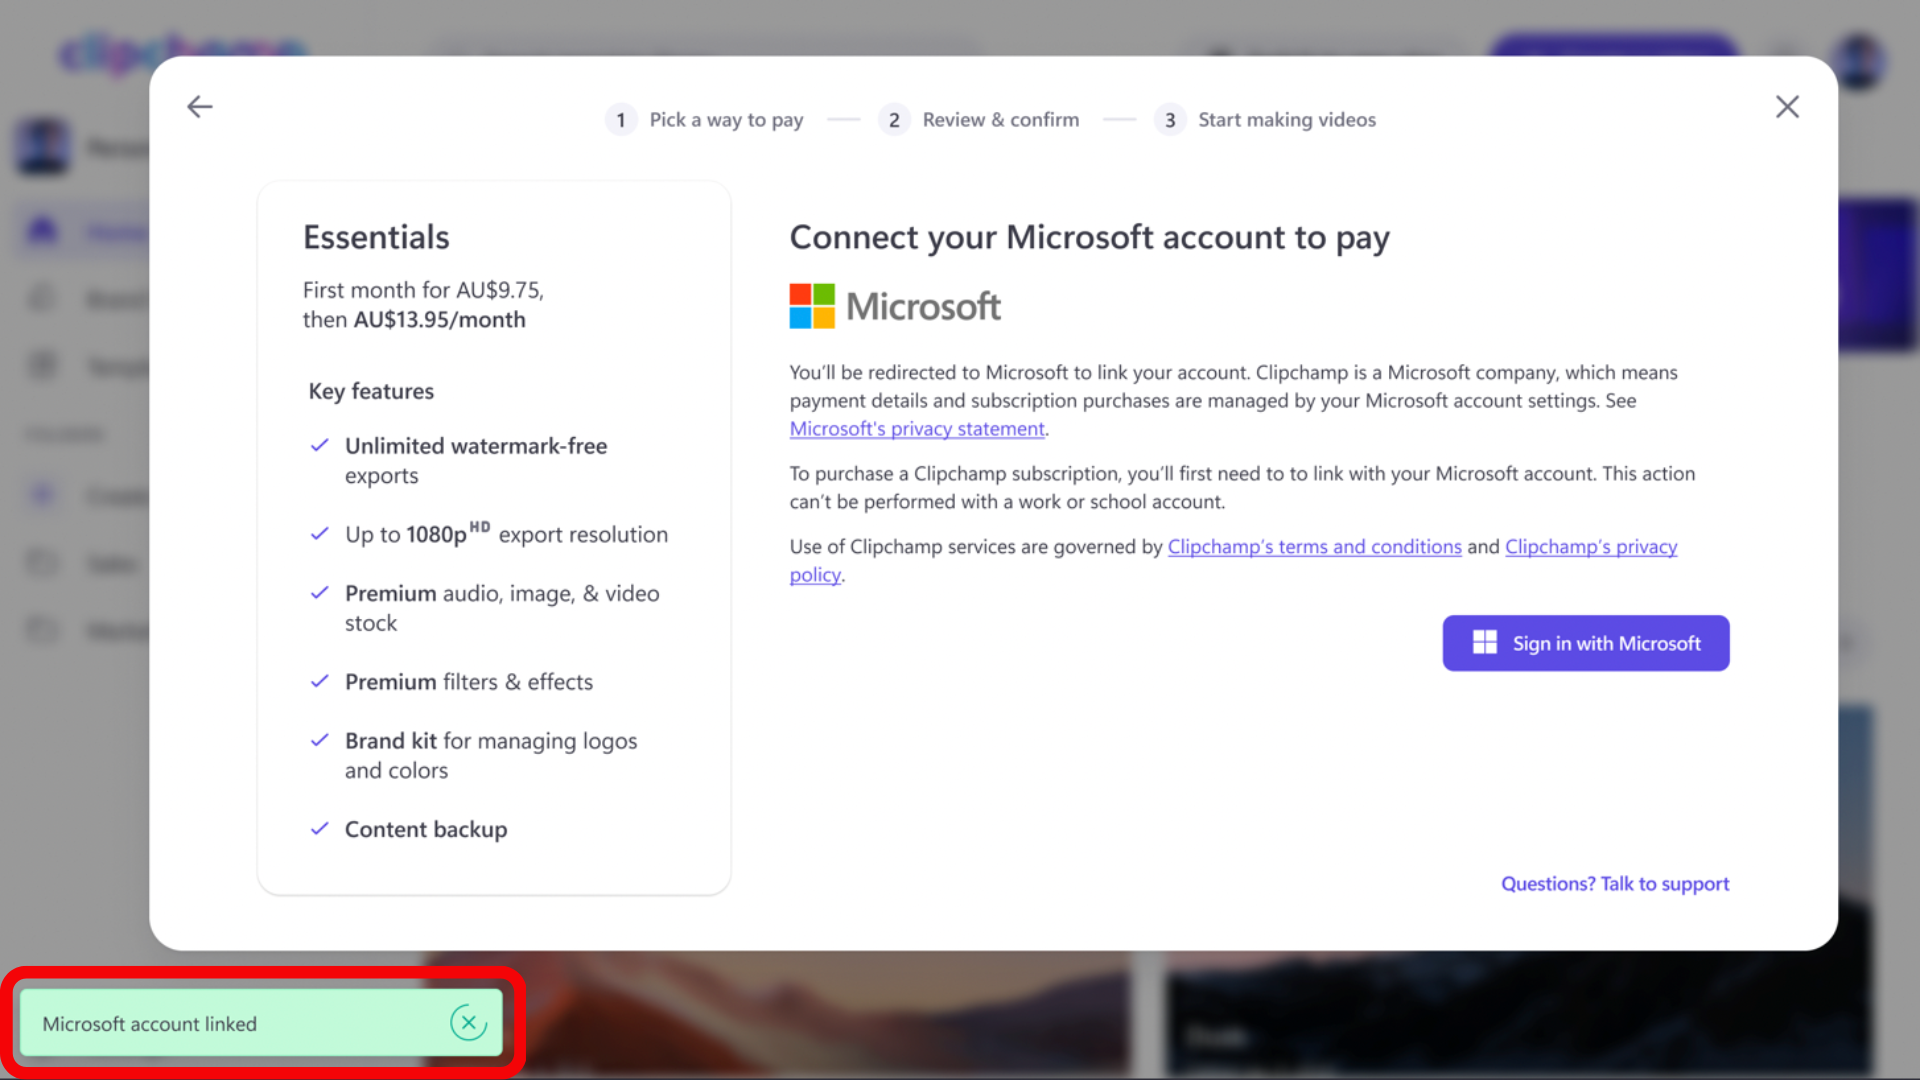 Microsoft account linked successfully popup